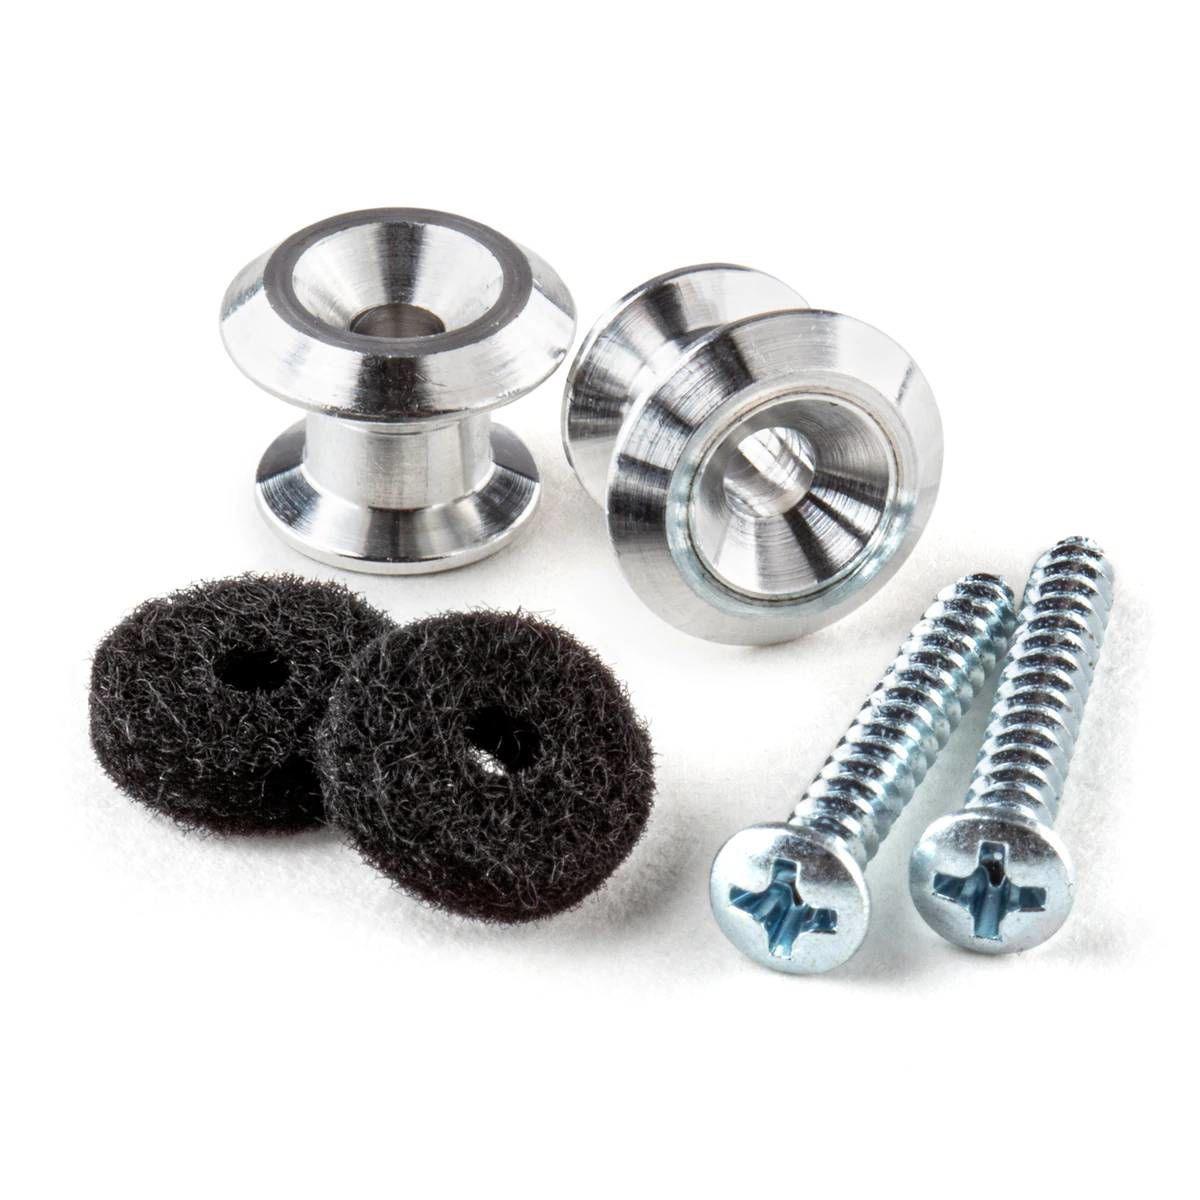 Dunlop Strap Buttons Aluminium - Guitars - Parts and Accessories by Dunlop at Muso's Stuff